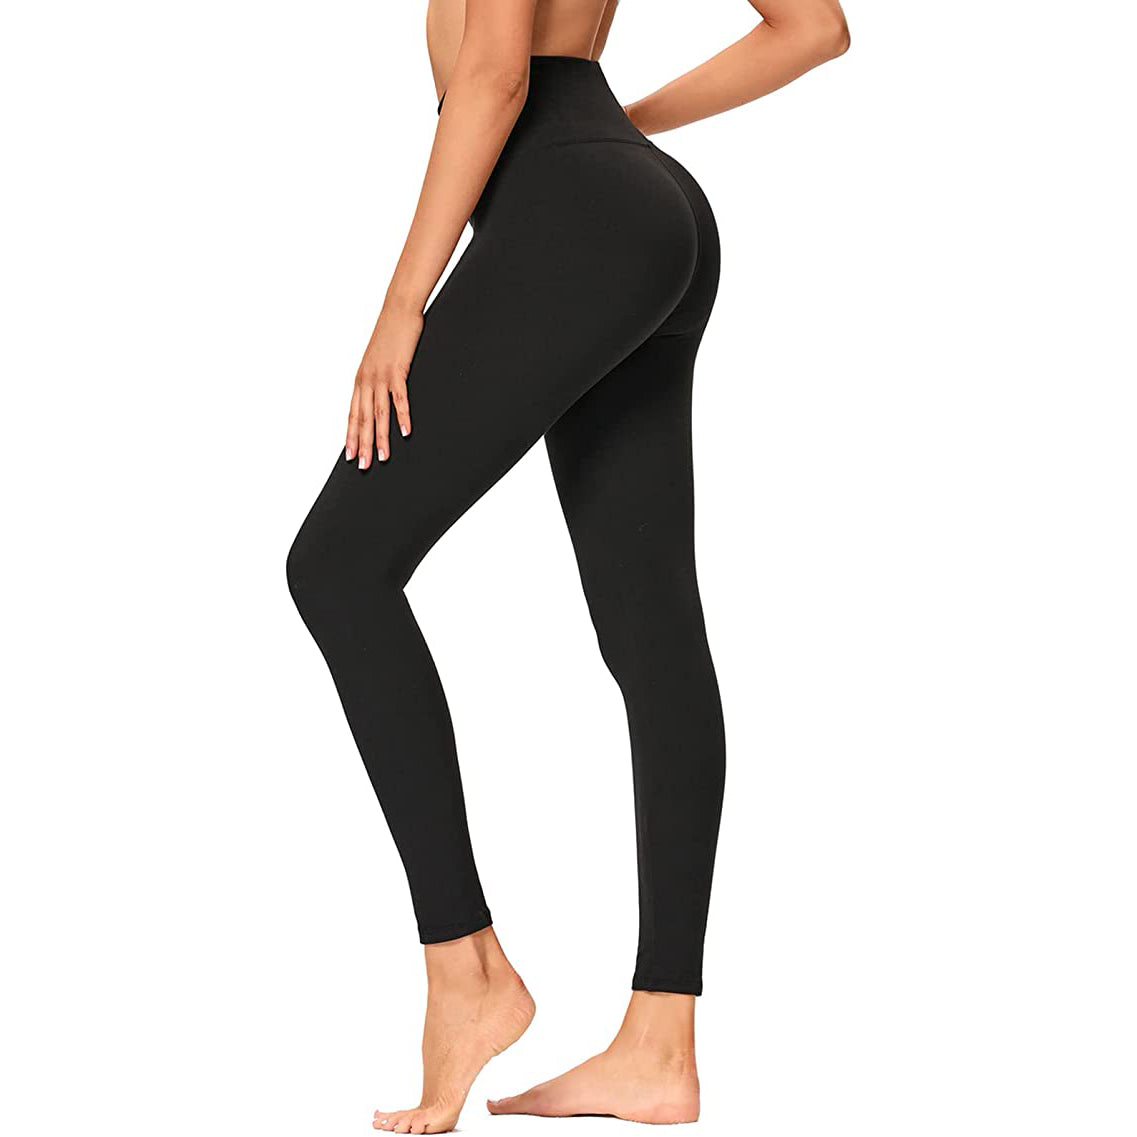 black women in yoga pants, black women in yoga pants Suppliers and  Manufacturers at